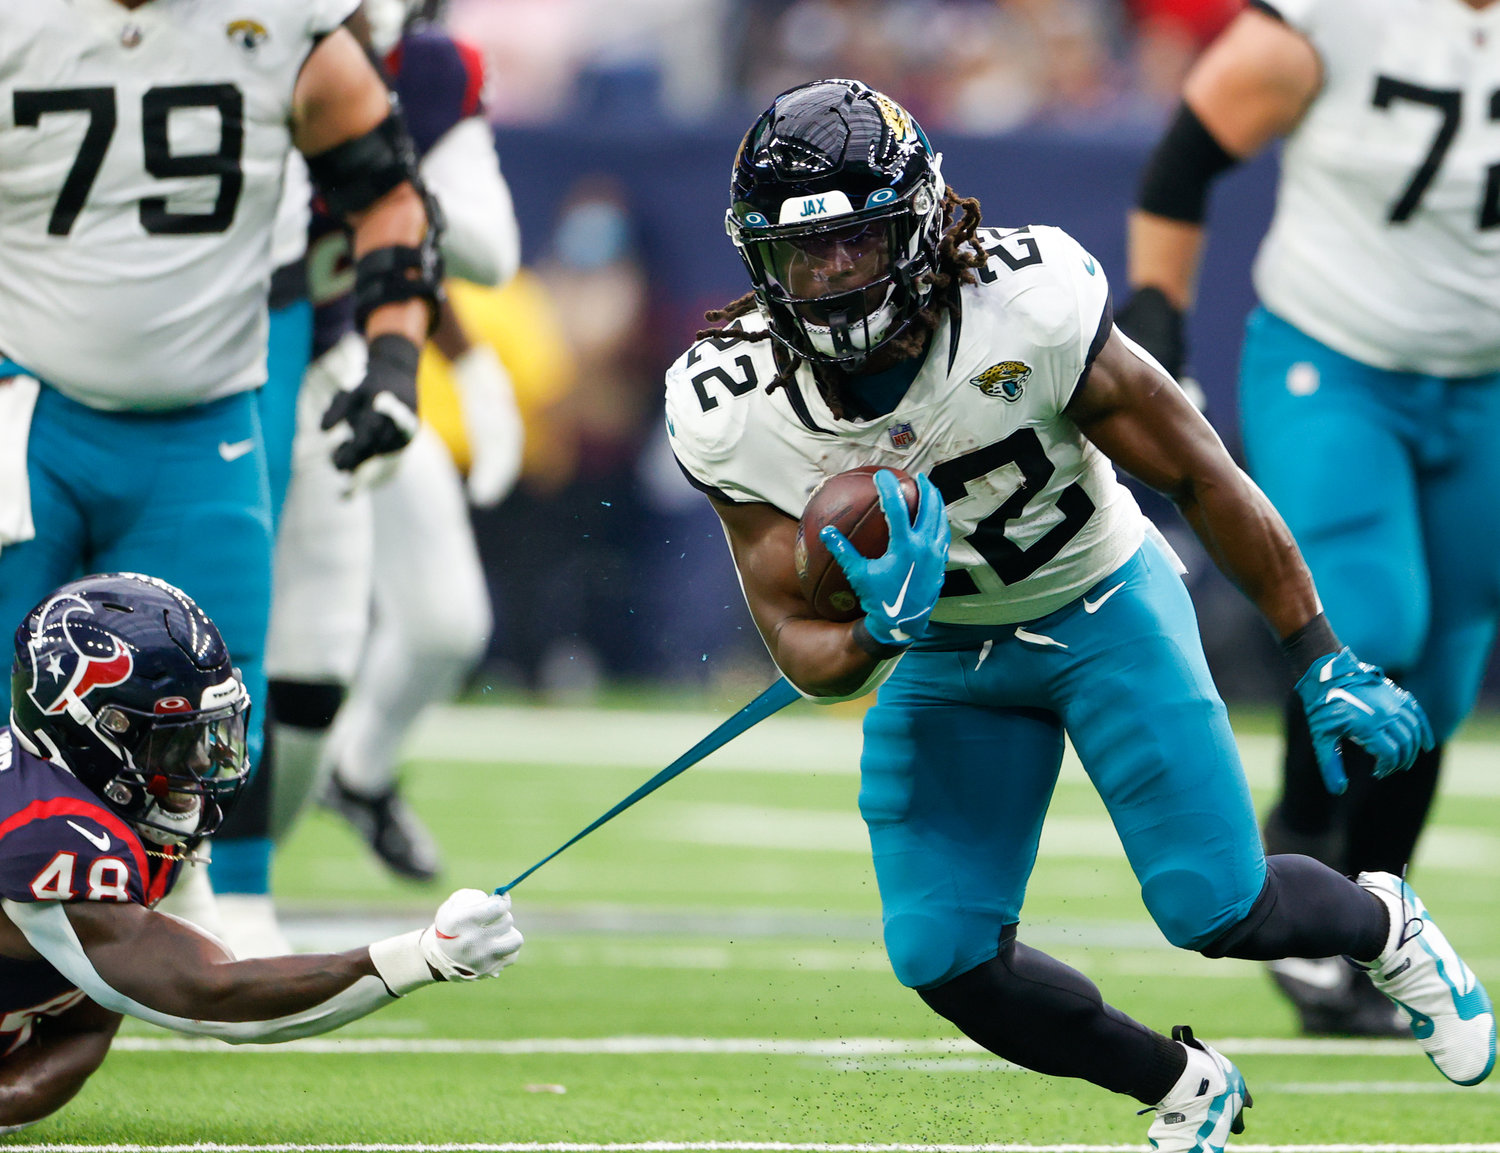 Texans linebacker Christian Harris (48) holds on and tears the jersey of Jaguars running back JaMycal Hasty (22) on a tackle attempt during an NFL game between the Houston Texans and the Jacksonville Jaguars on Jan. 1, 2023 in Houston. The Jaguars won, 31-3.